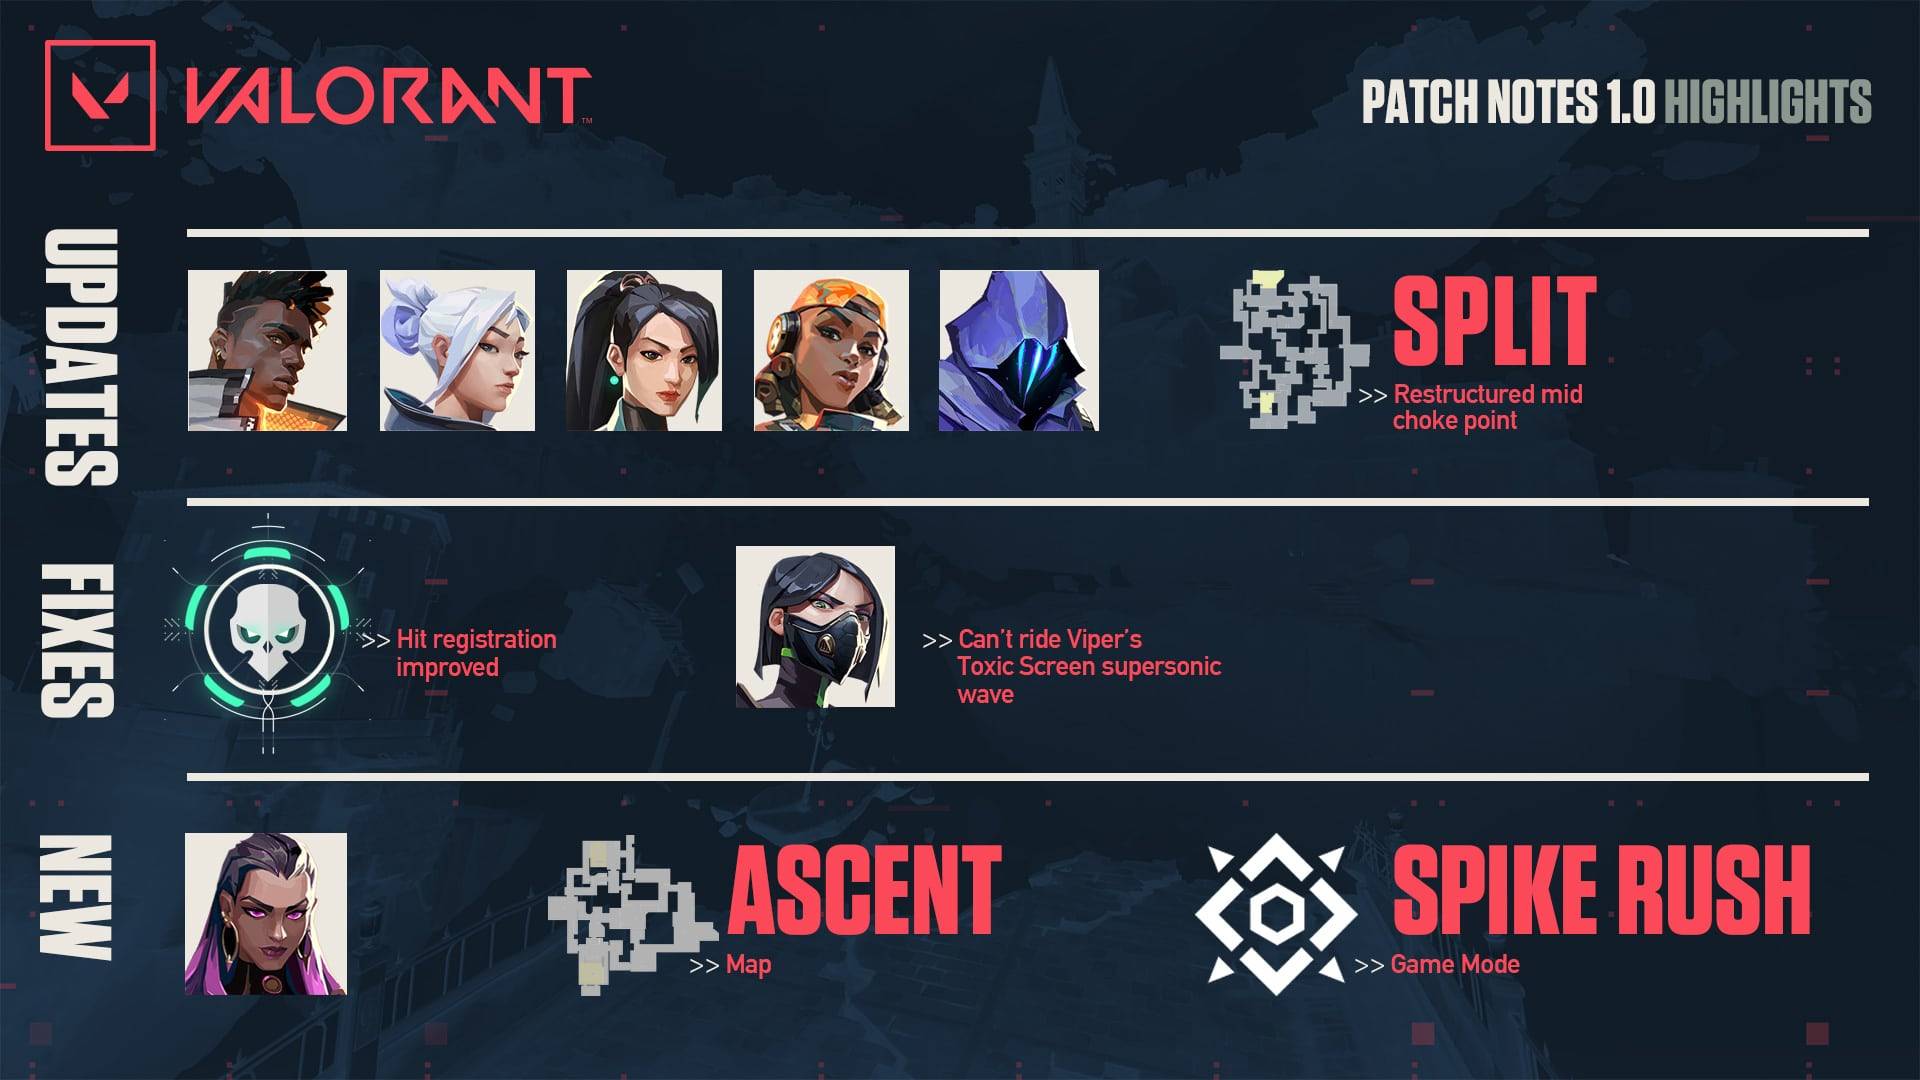 VAL patchnotes1 graphic 2